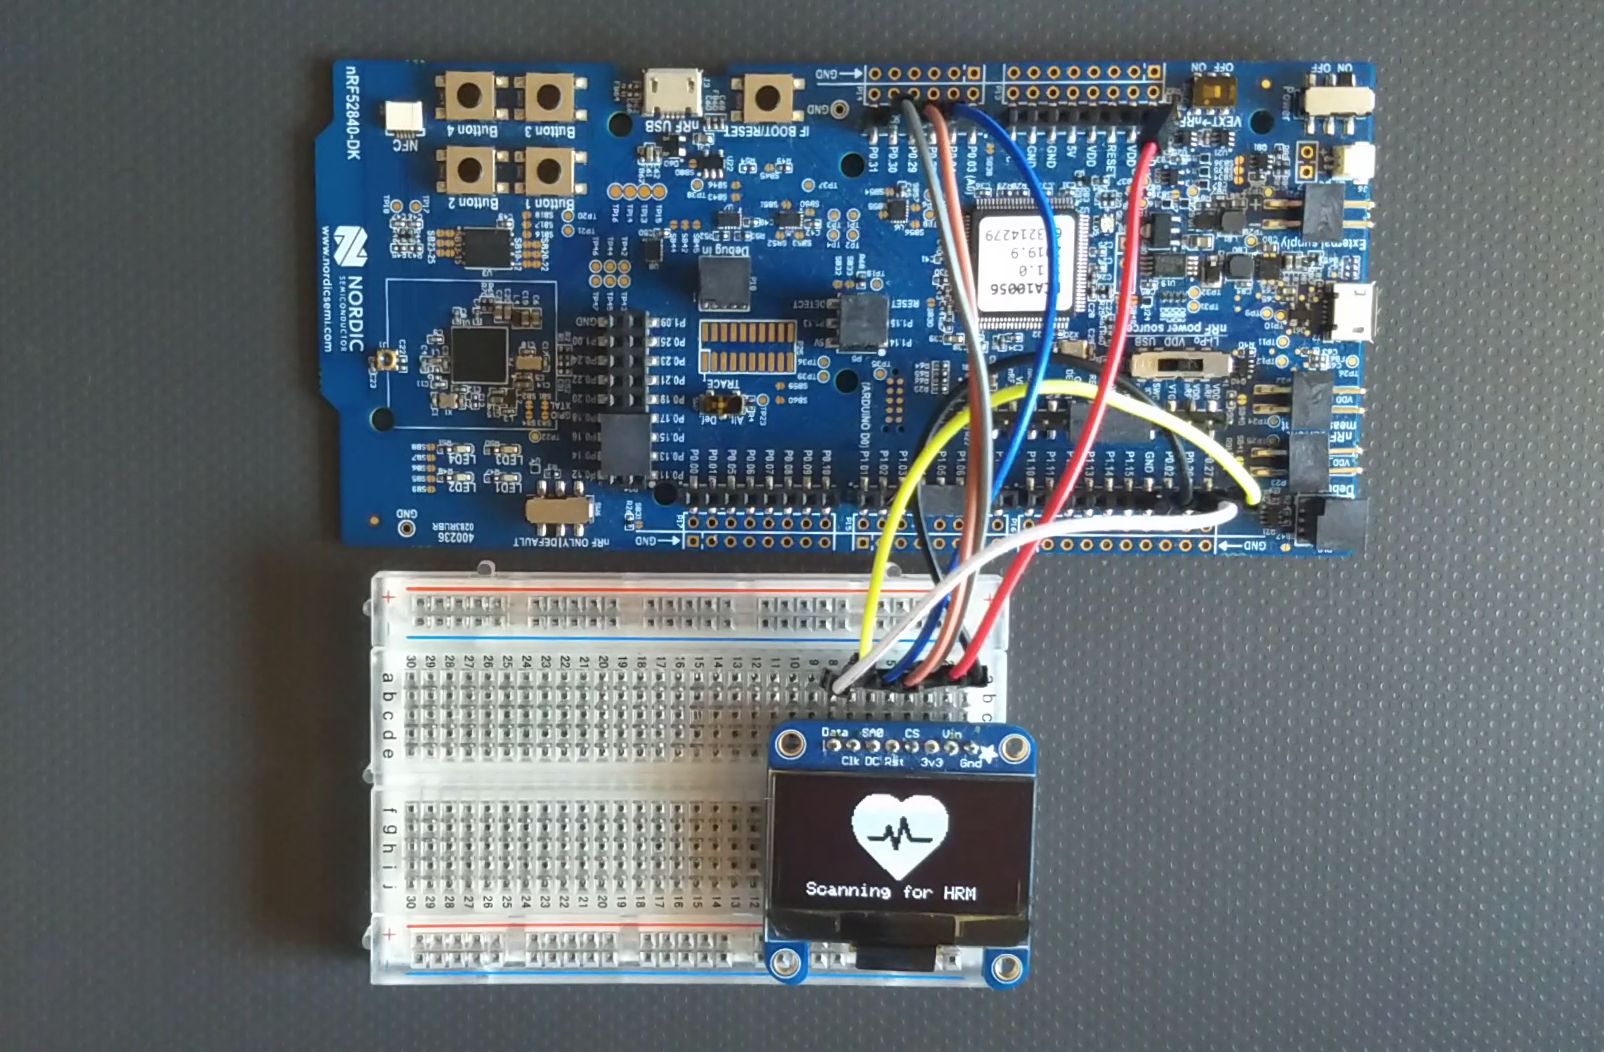 Nordic nRF52840 Heart Rate Monitor